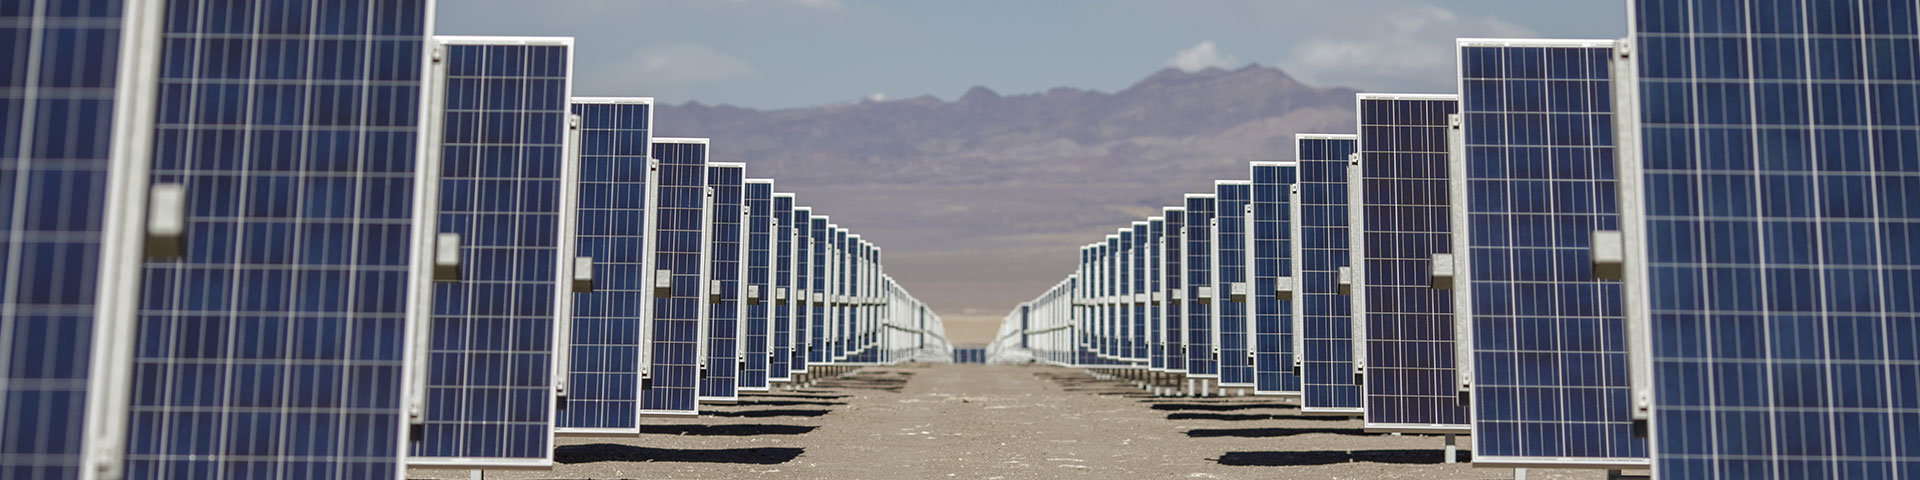 Numerous photovoltaic modules stand one behind the other in a solar park. Copyright: GIZ